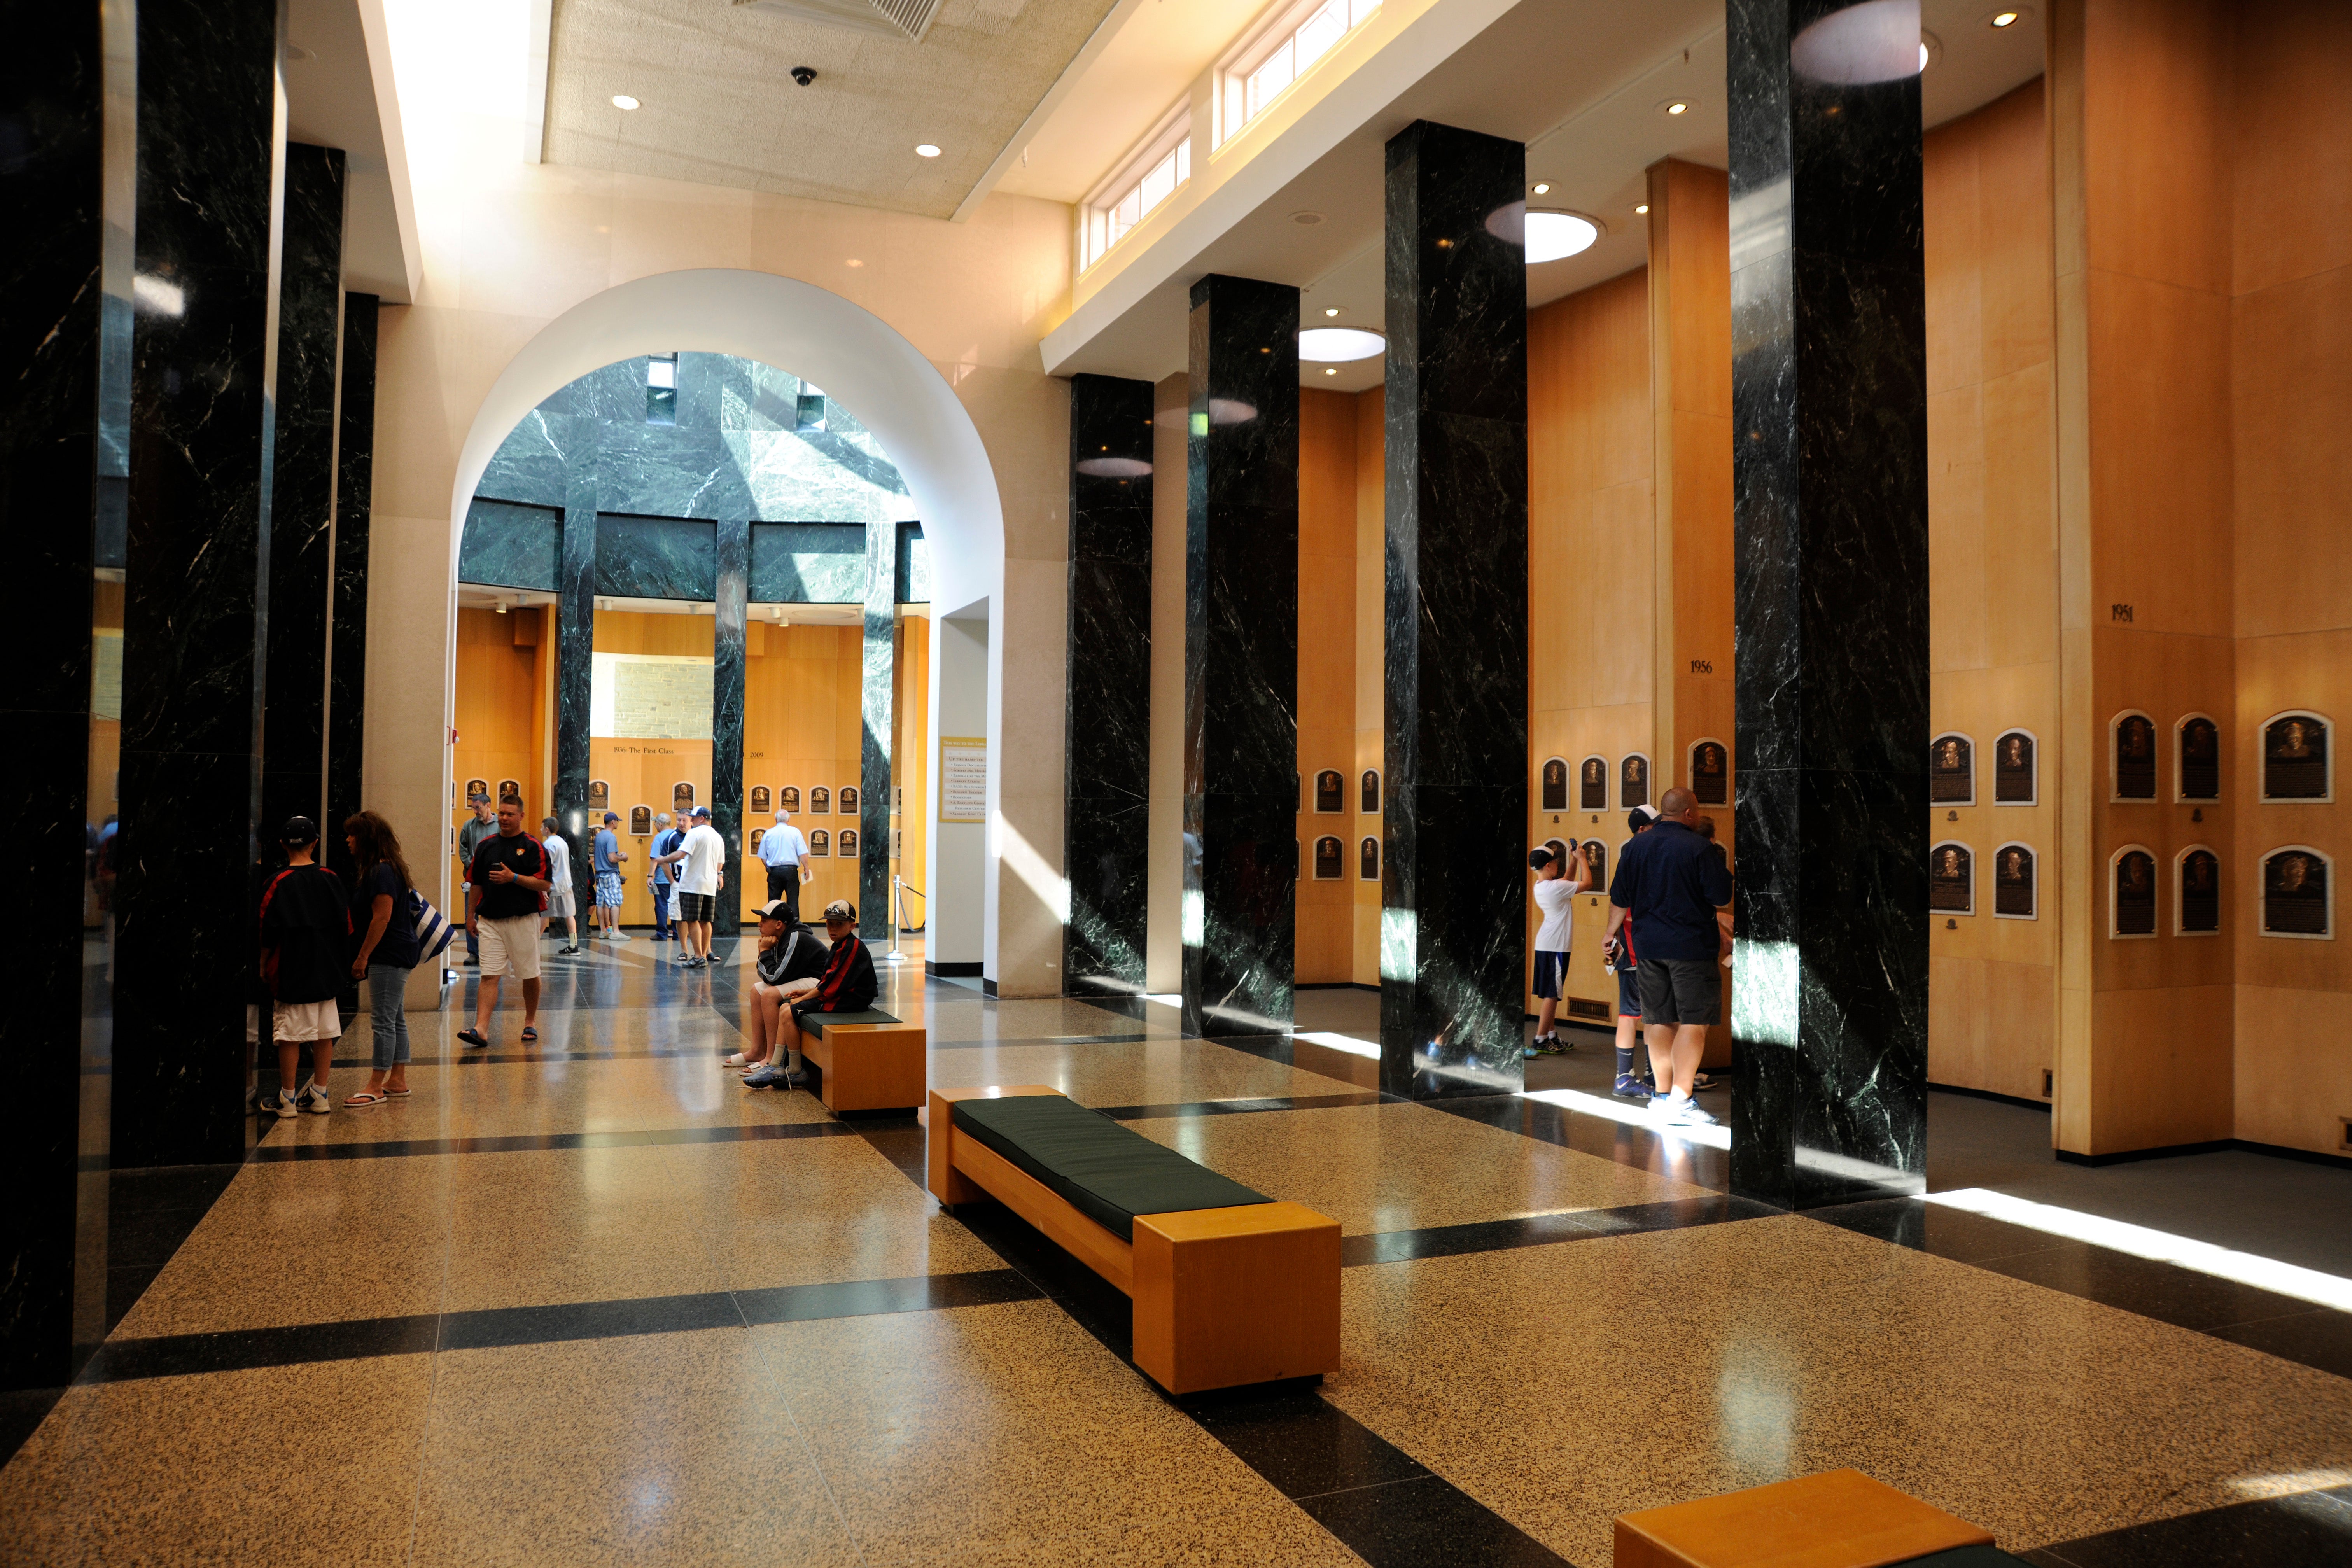 The Hall of Fame Plaque Gallery